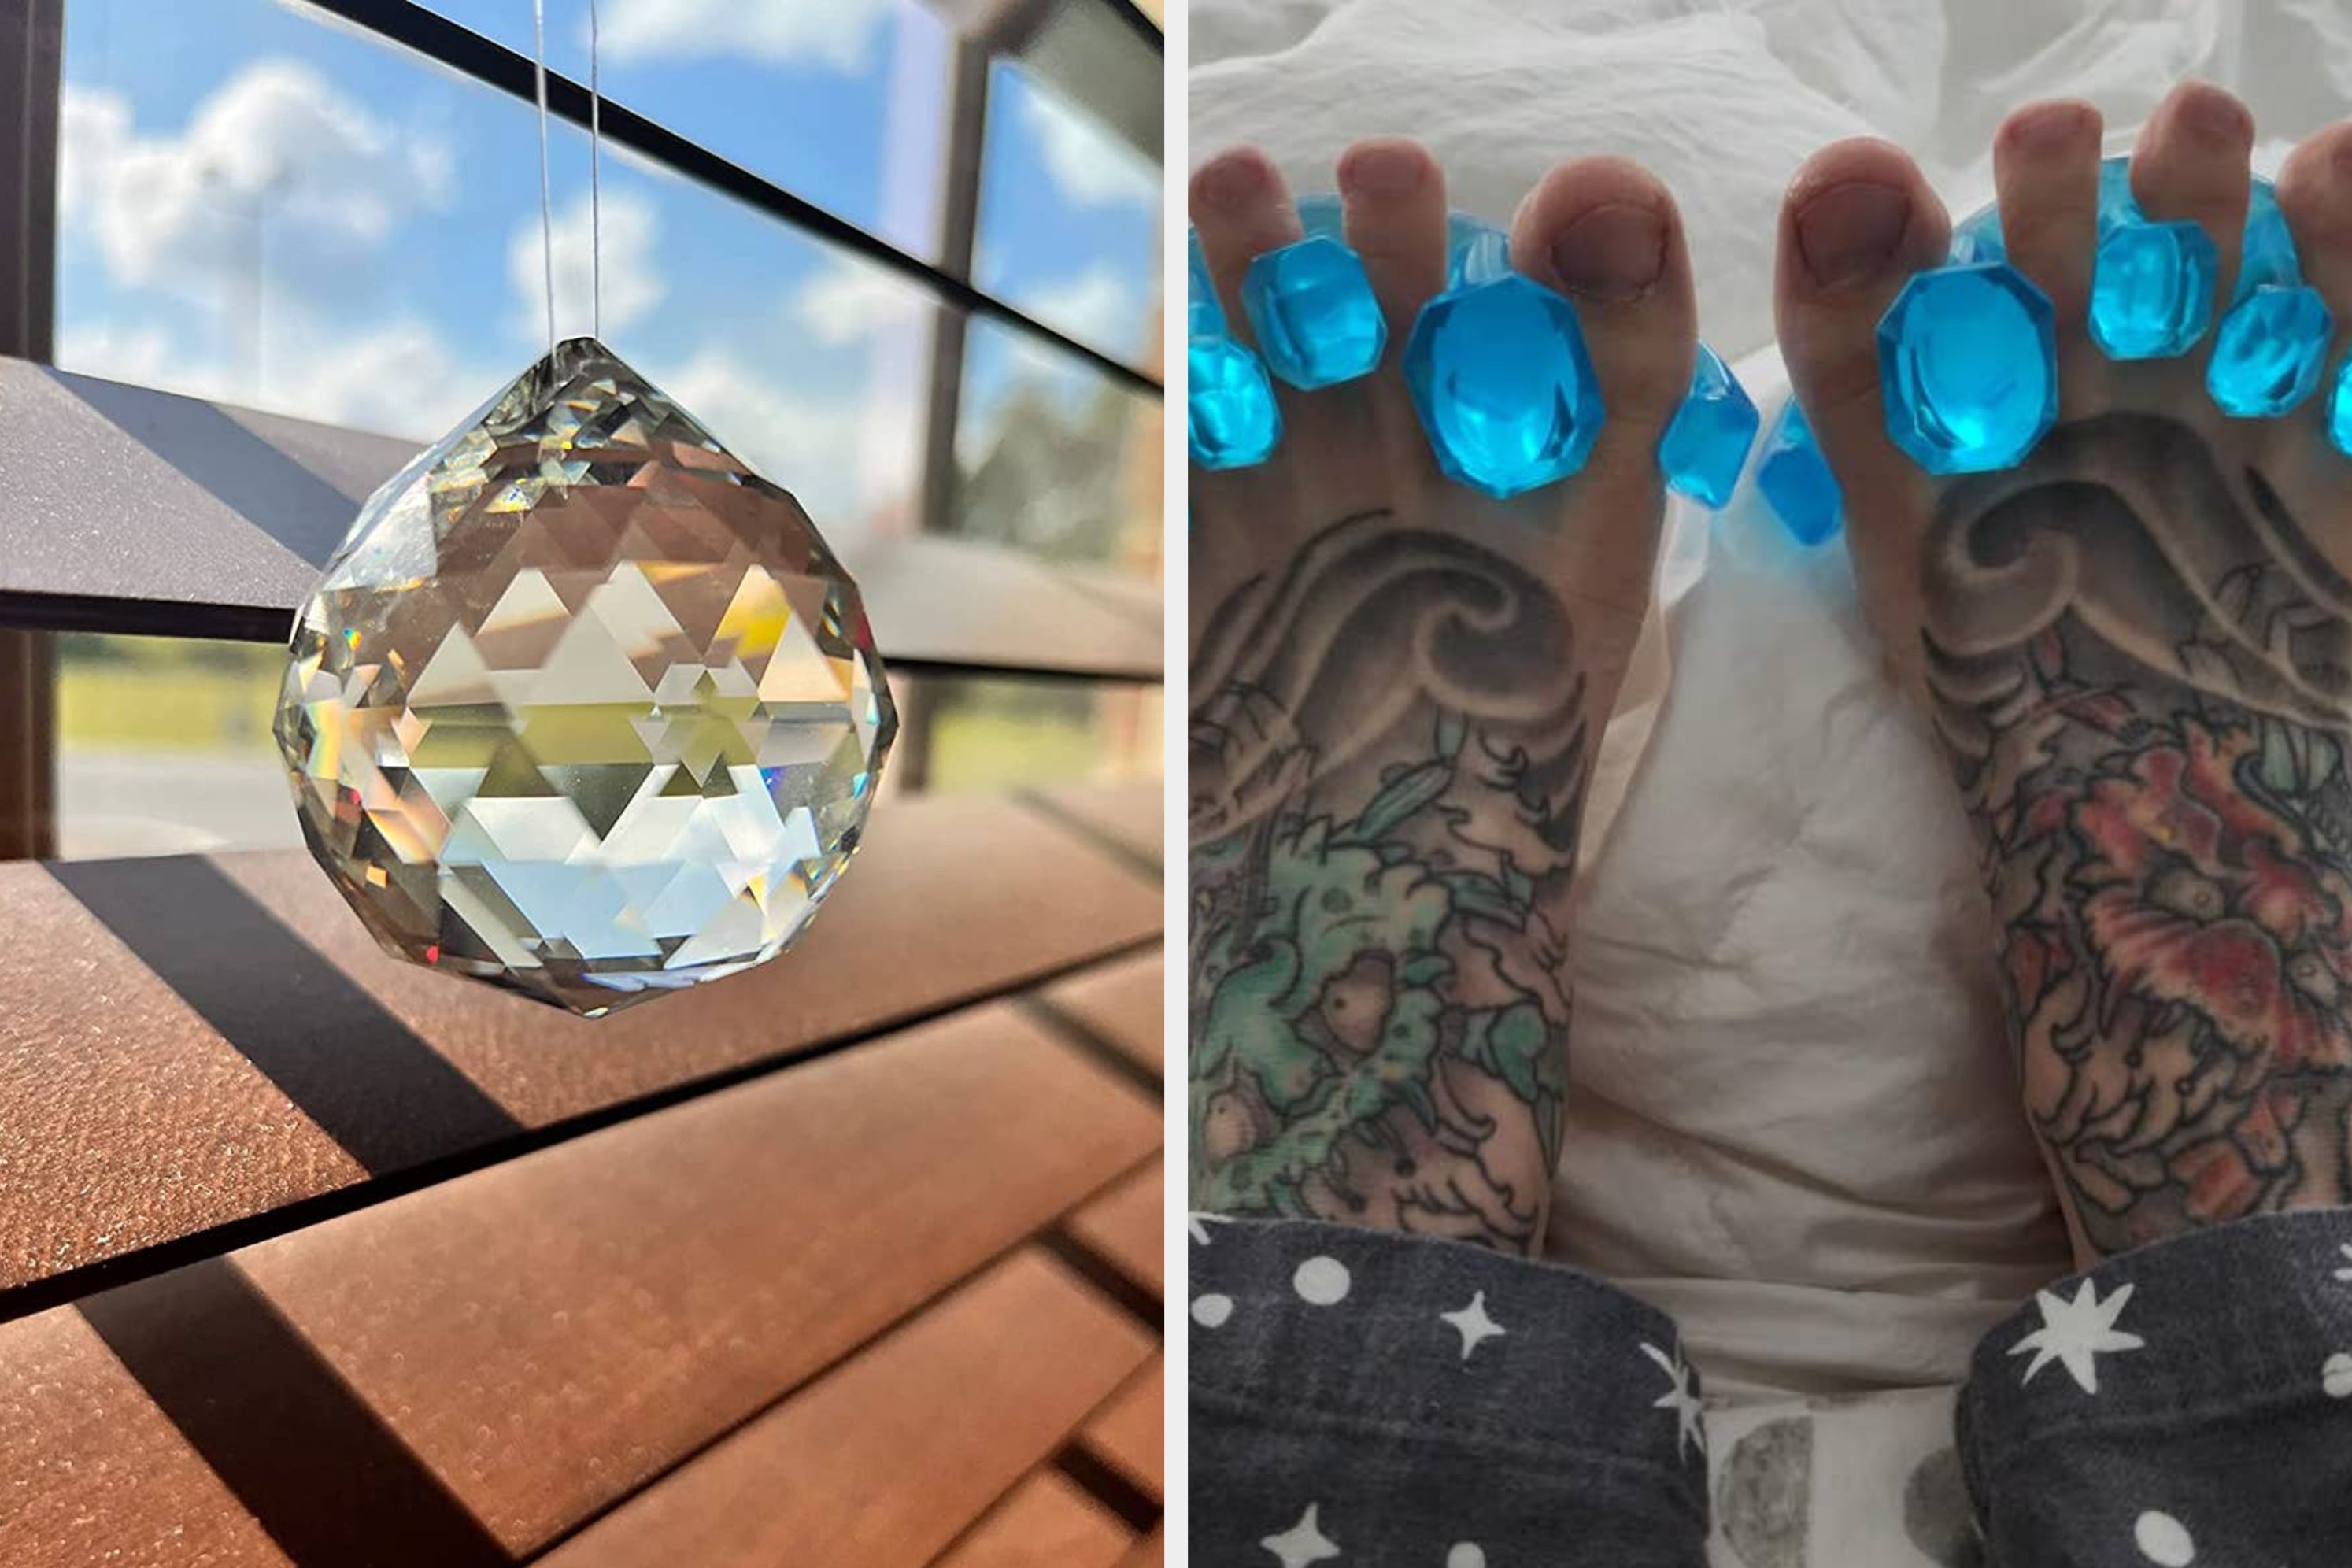 31 Things From Amazon Our Readers Are Loving Right Now